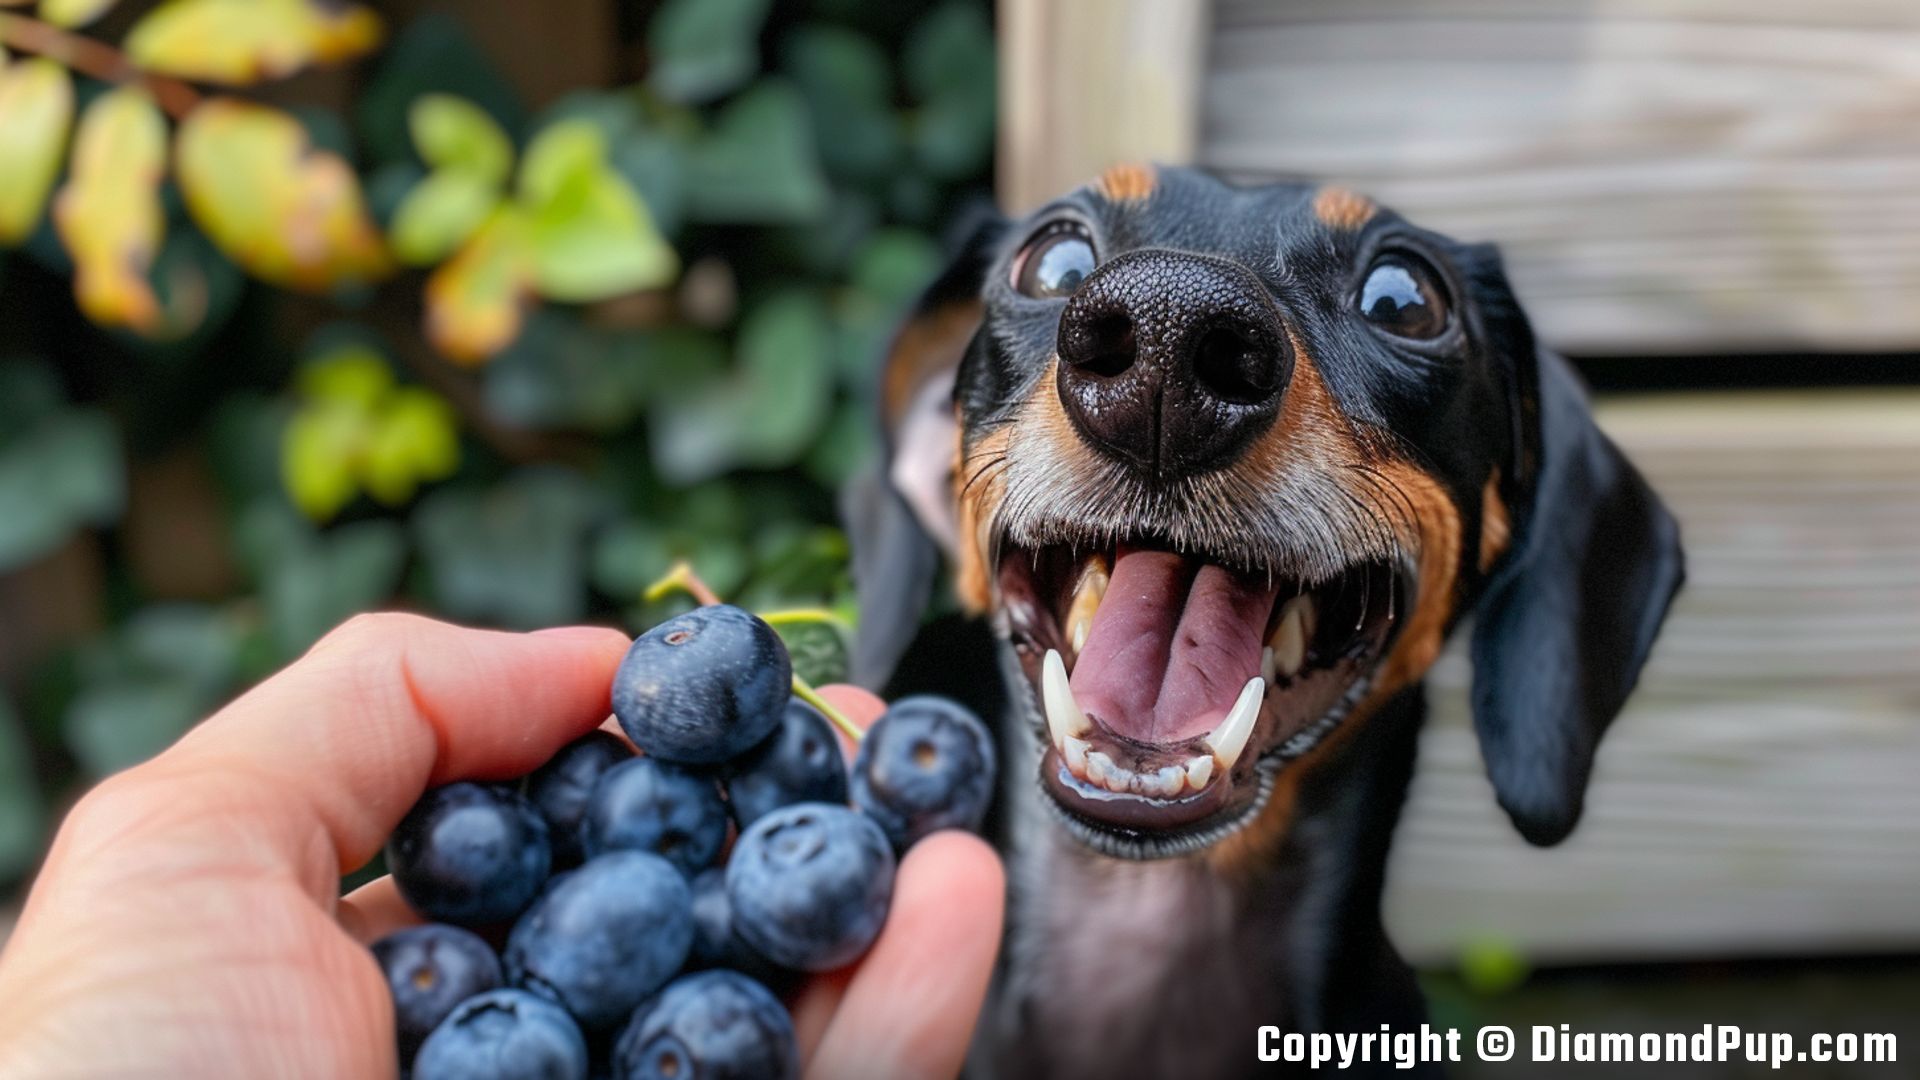 Photograph of a Playful Dachshund Snacking on Blueberries